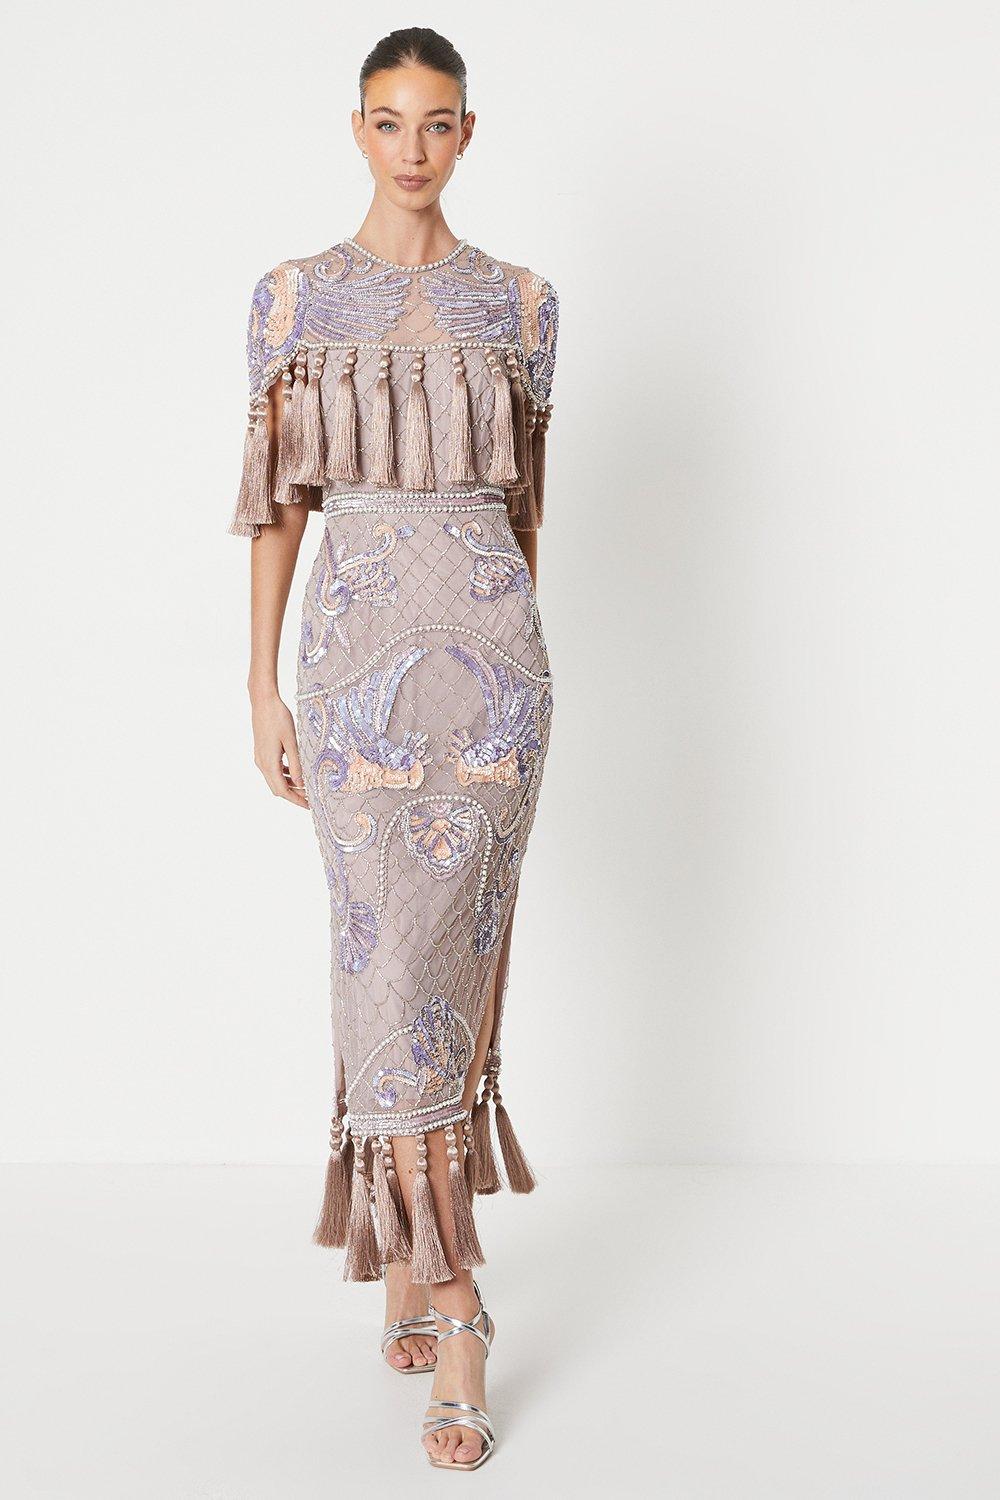 The Collector Hand Embellished Midi Dress With Tassles - Mink